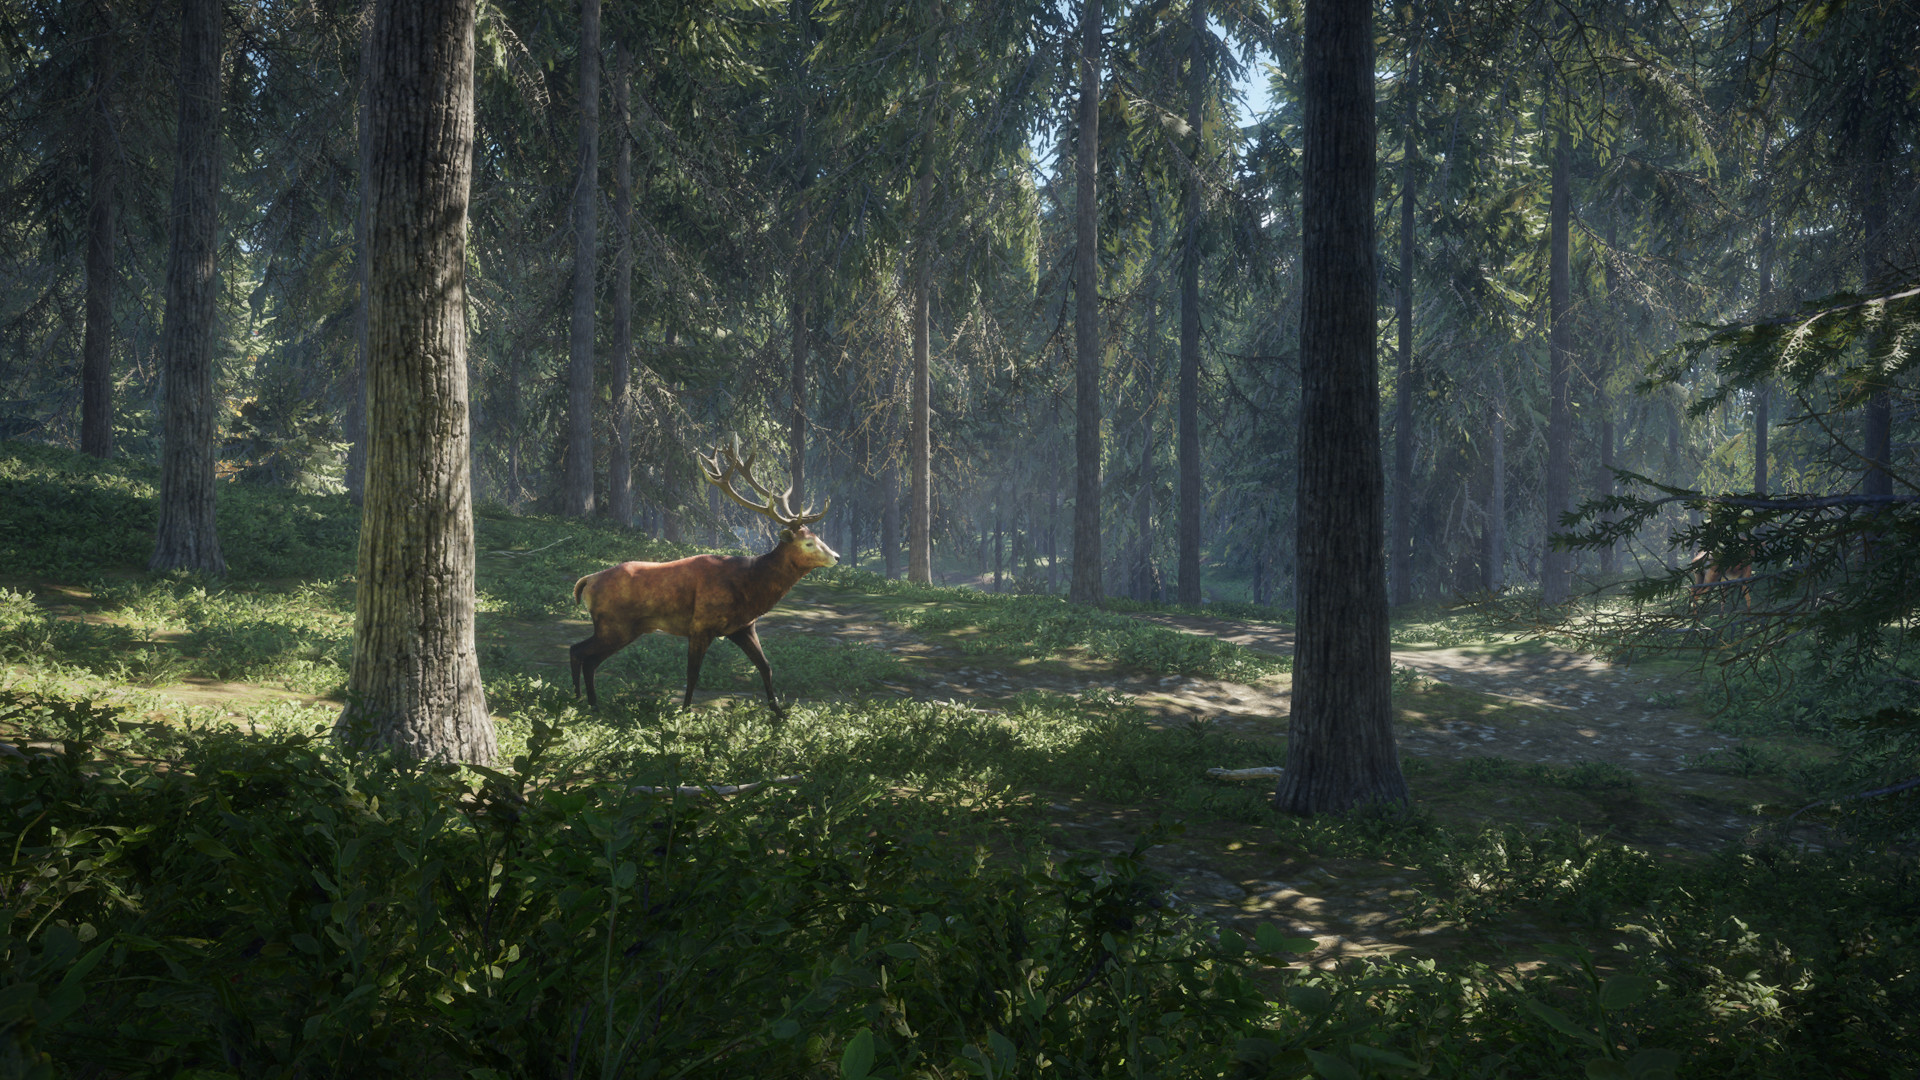 The Hunter Call of the Wild - Multiplayer Deer Hunting! - theHunter Call of the  Wild Beta Gameplay 